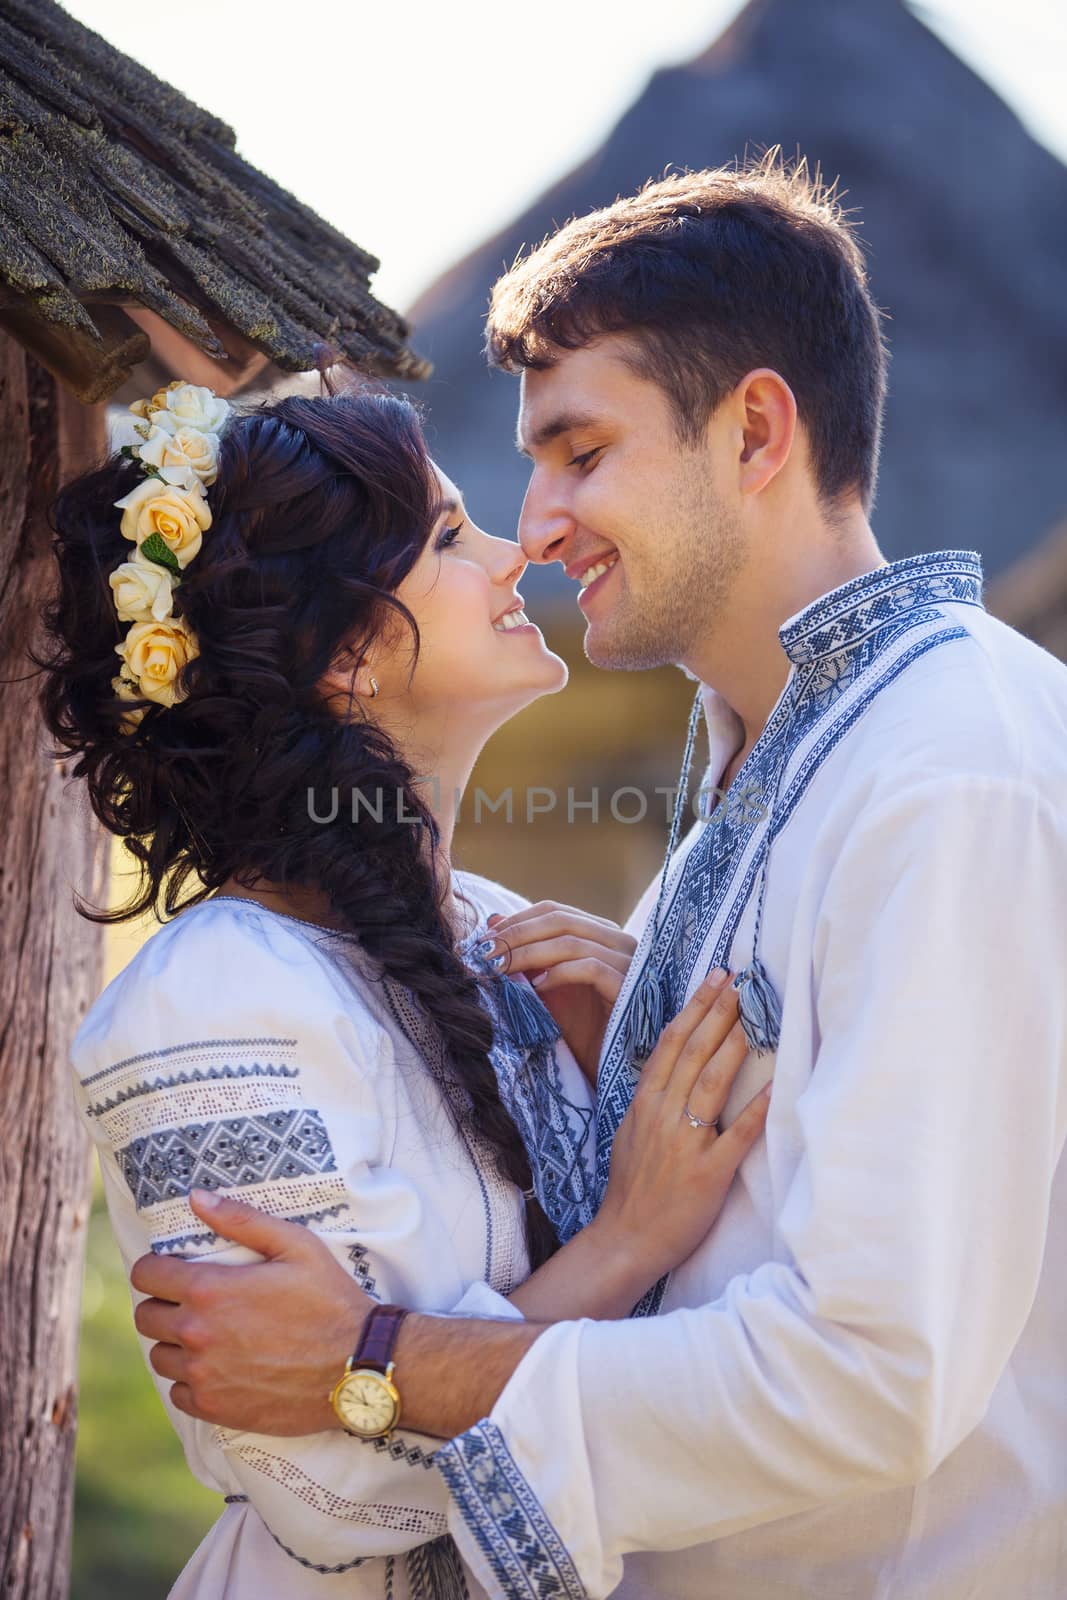 Romantic young couple in Ukrainian style clothes outdoors